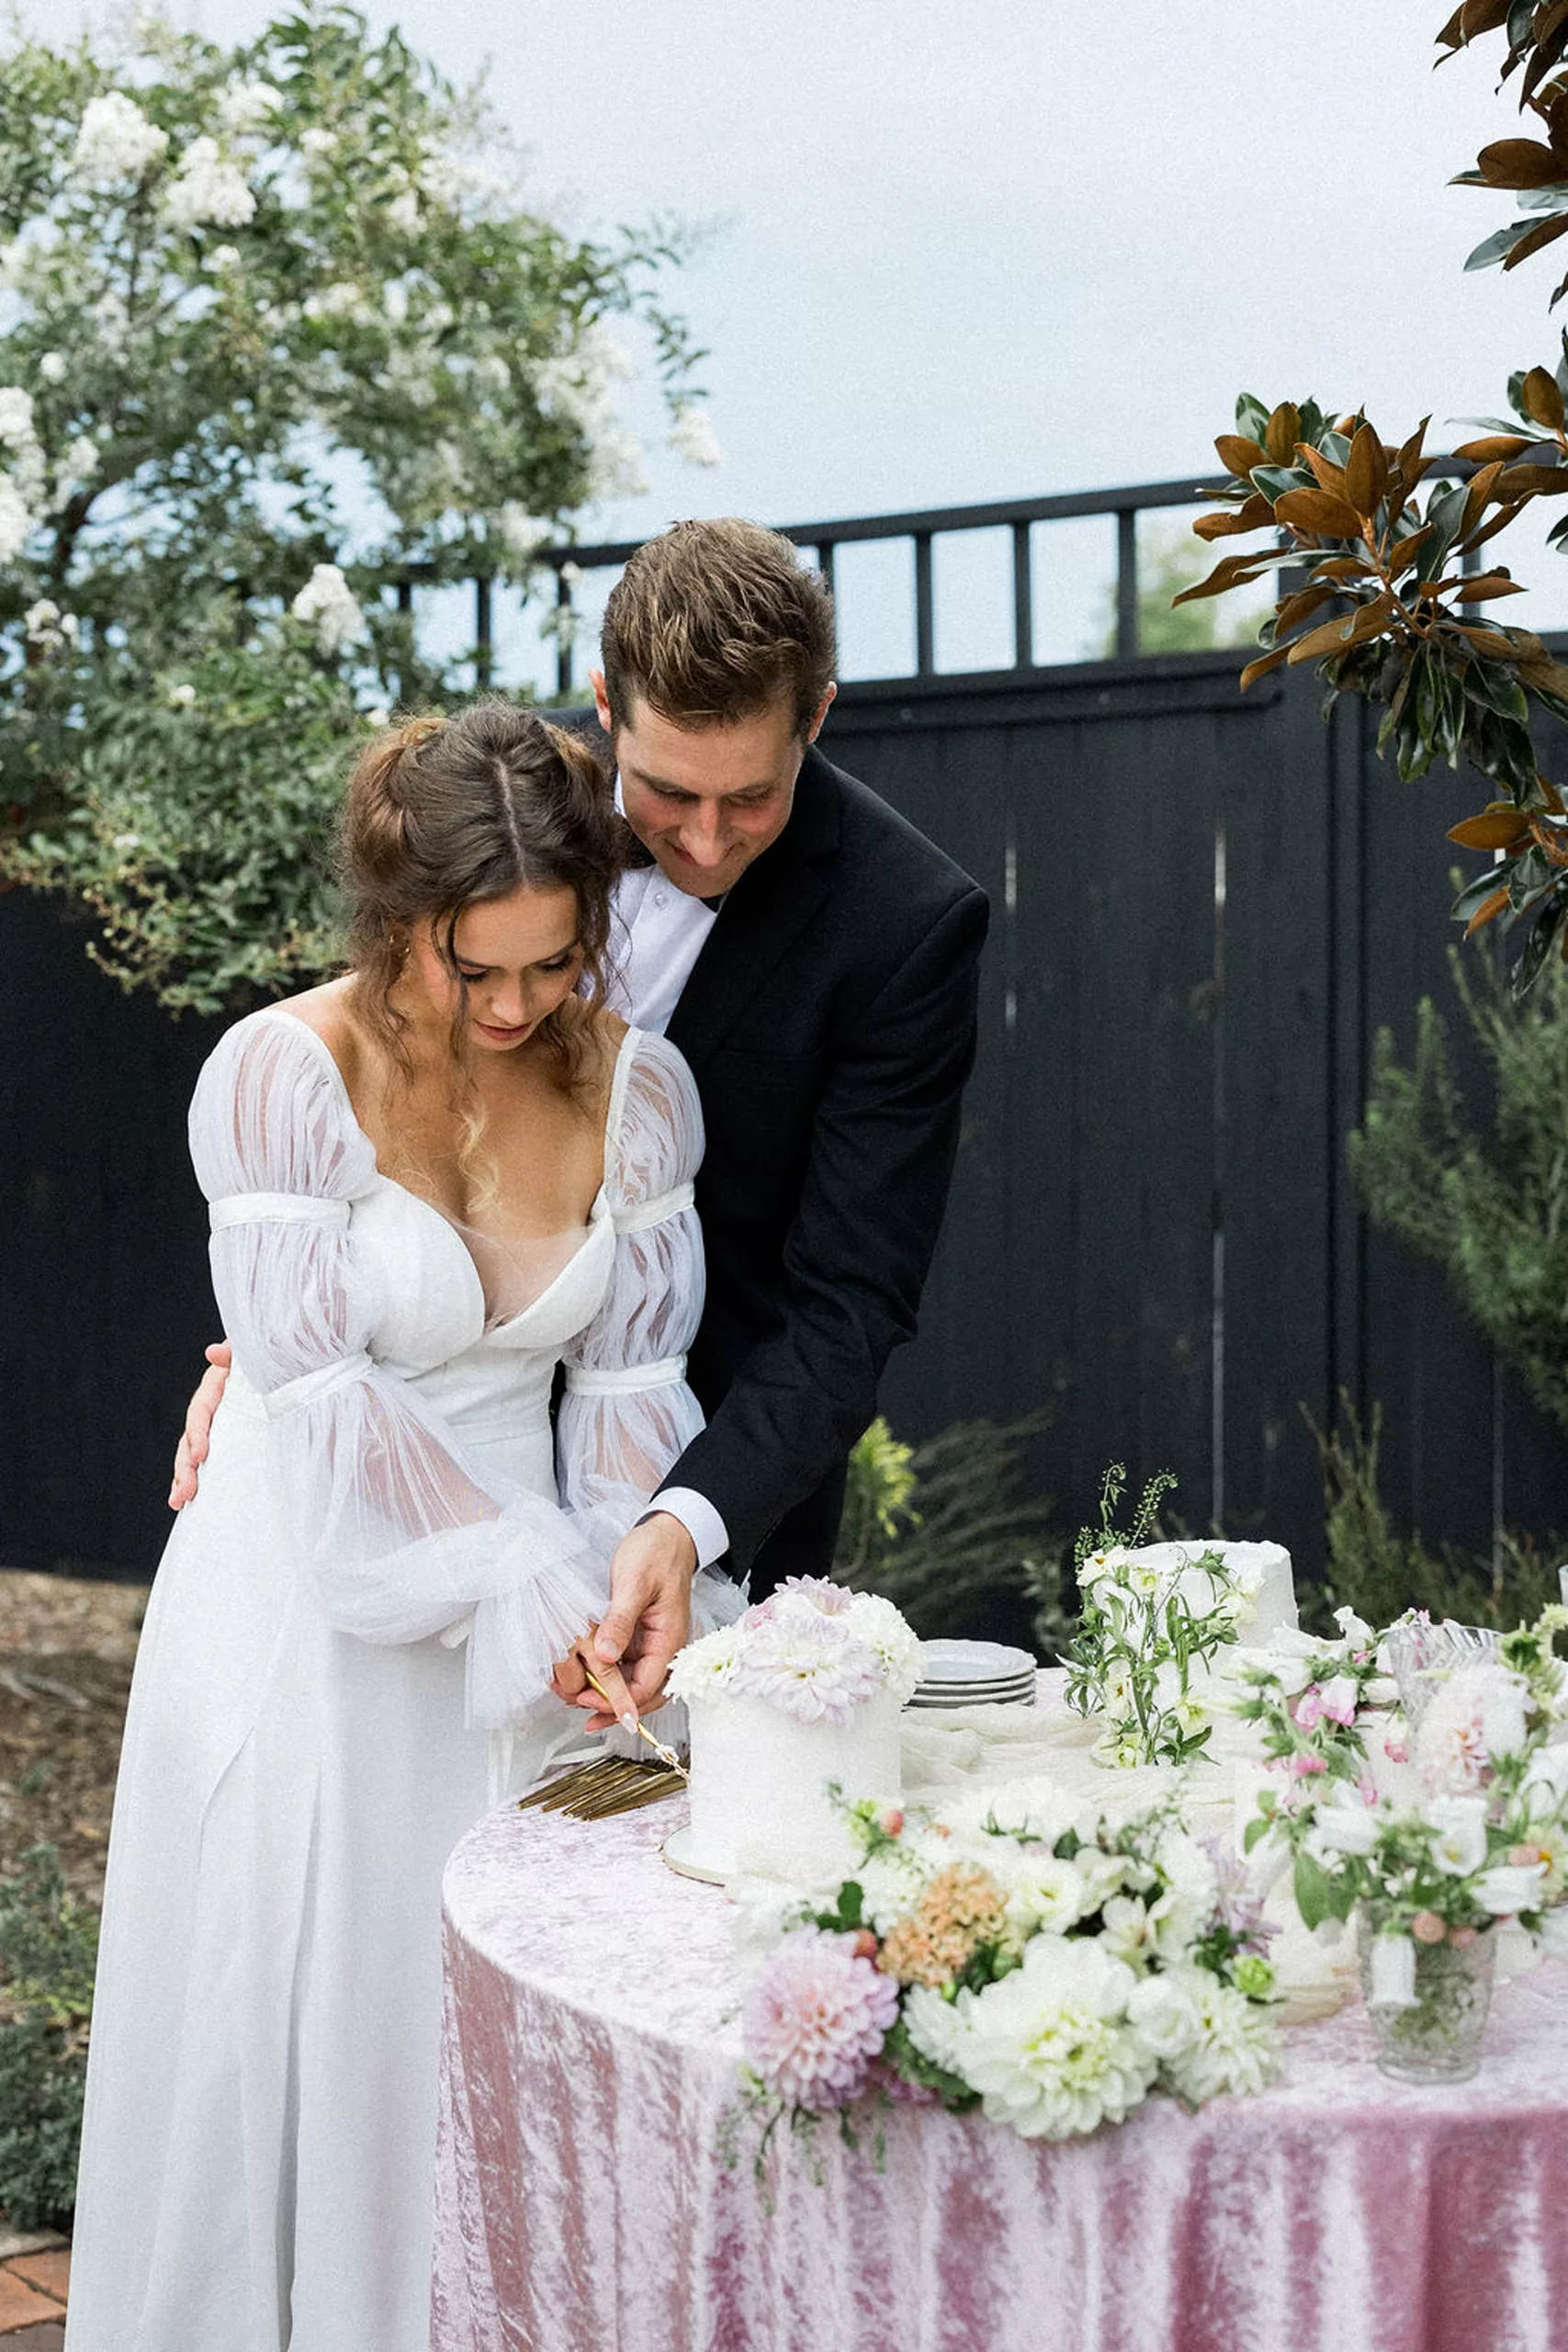 Newlyweds cut their cake together at a pink linen flower covered table in a garden at an lillian gardens wedding